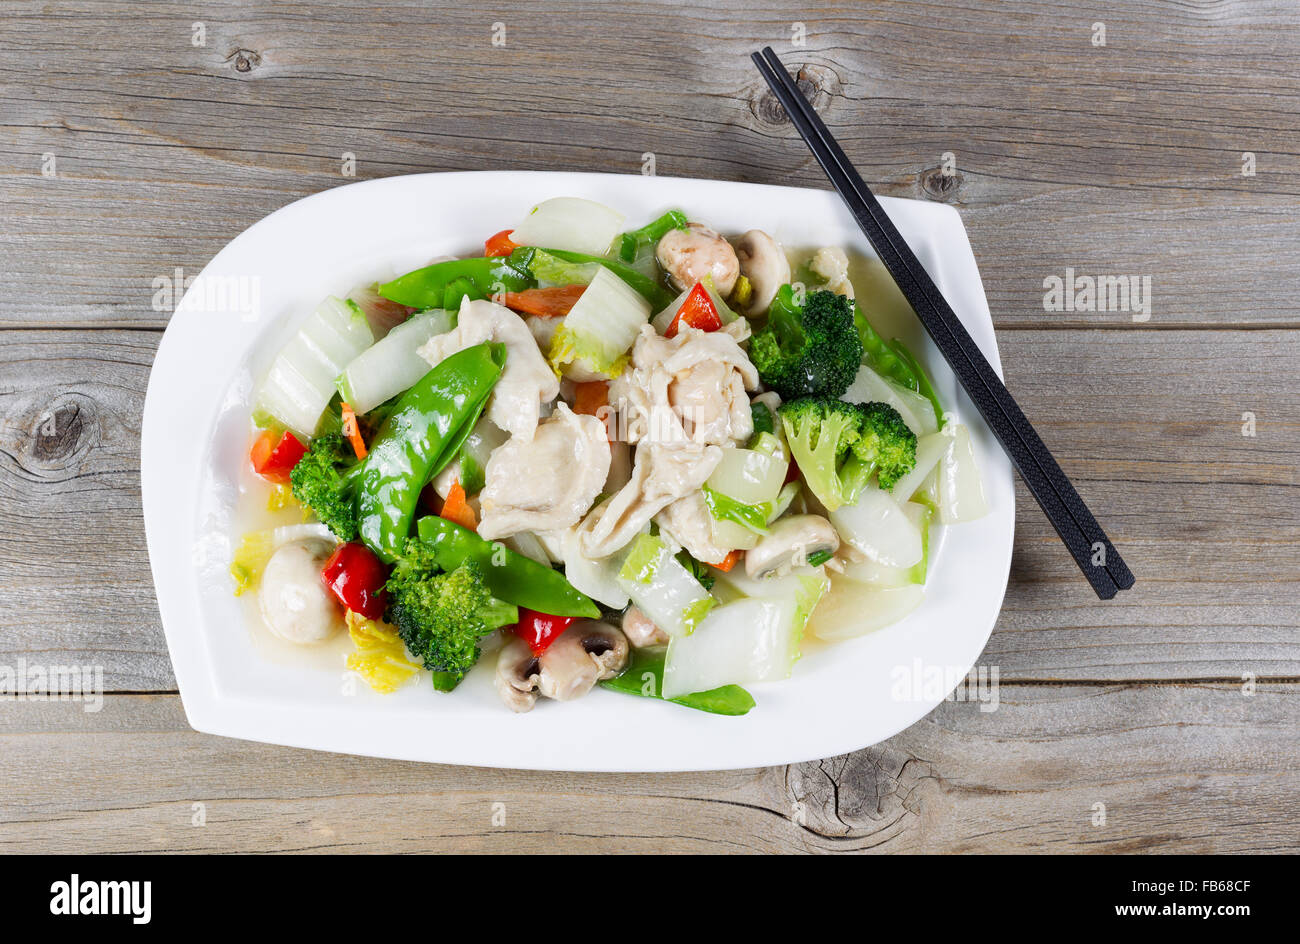 Top view of stir fried white chicken pieces with broccoli, snow peas, peppers and mushroom in white plate on rustic wood setting Stock Photo